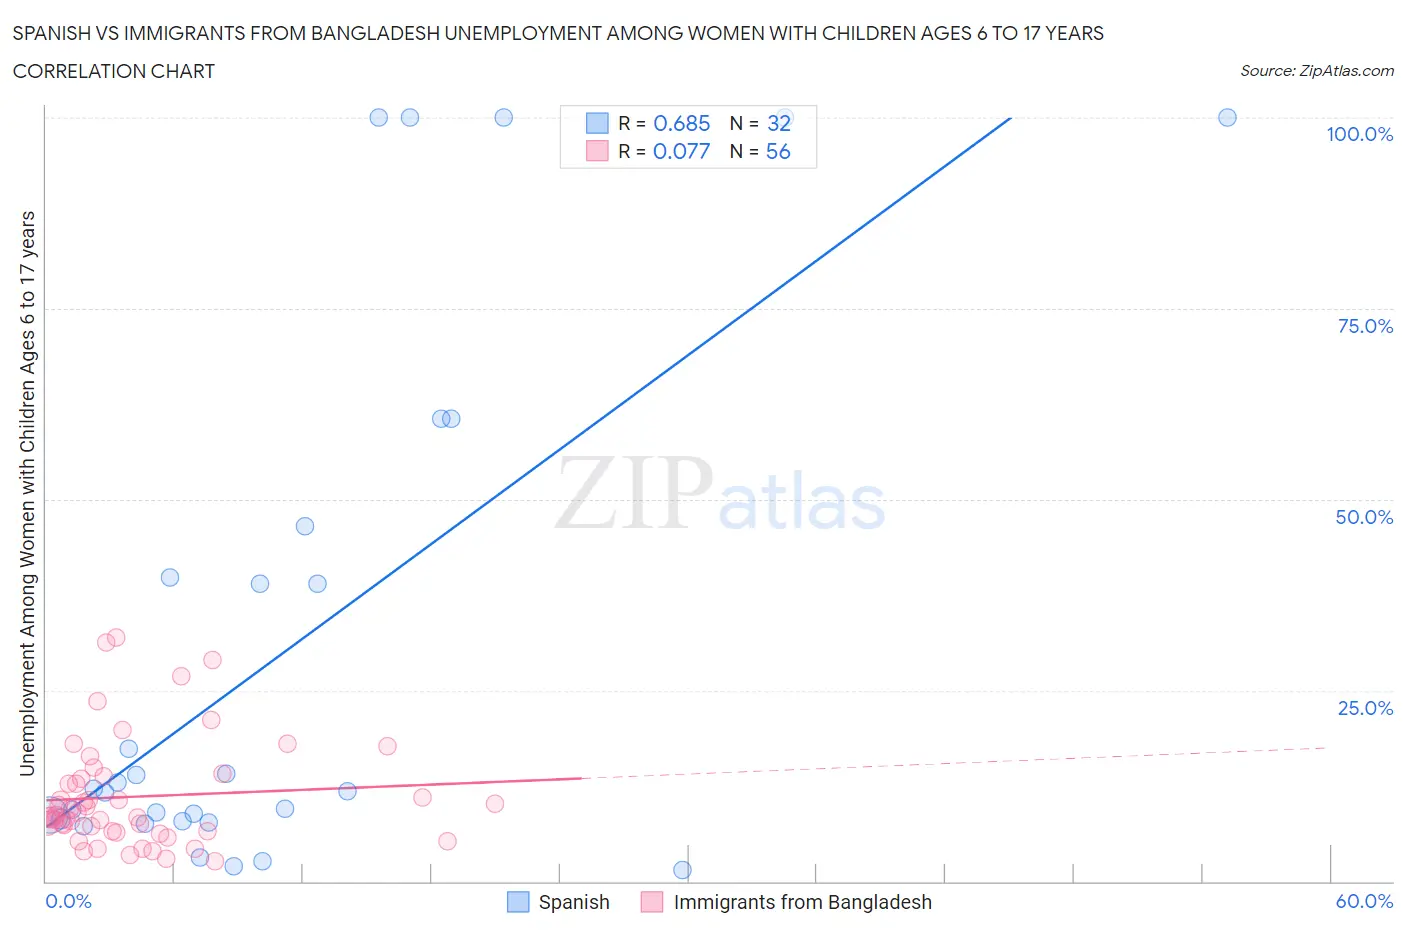 Spanish vs Immigrants from Bangladesh Unemployment Among Women with Children Ages 6 to 17 years